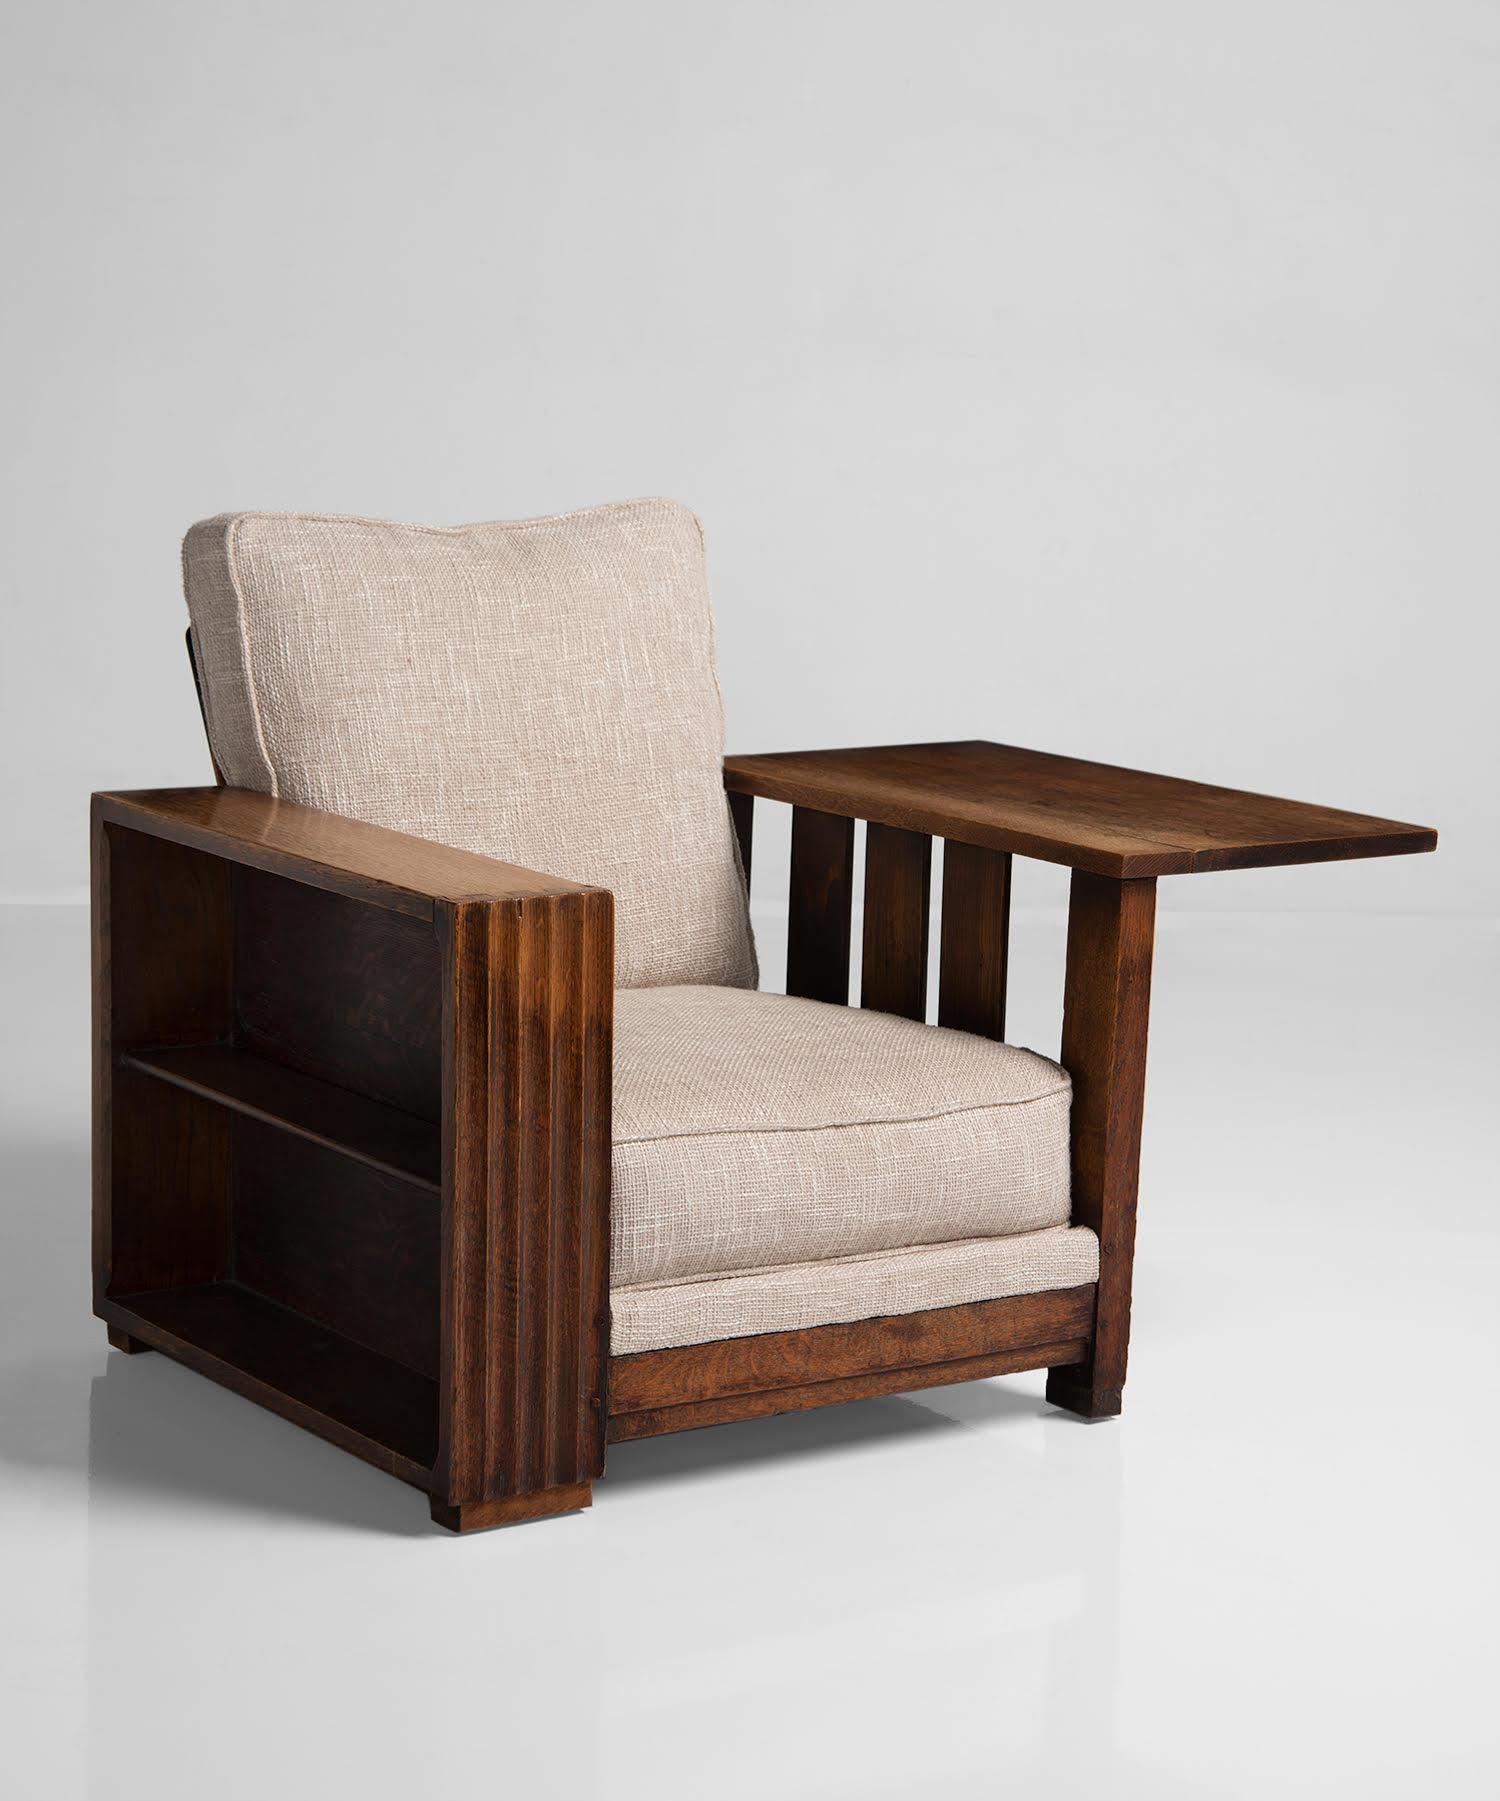 Heals of London oak reading armchair, England, circa 1920.

Large, comfortable armchair with a classic design by Heals of London. Newly upholstered in neutral fabric, with oak frame and fold down table.